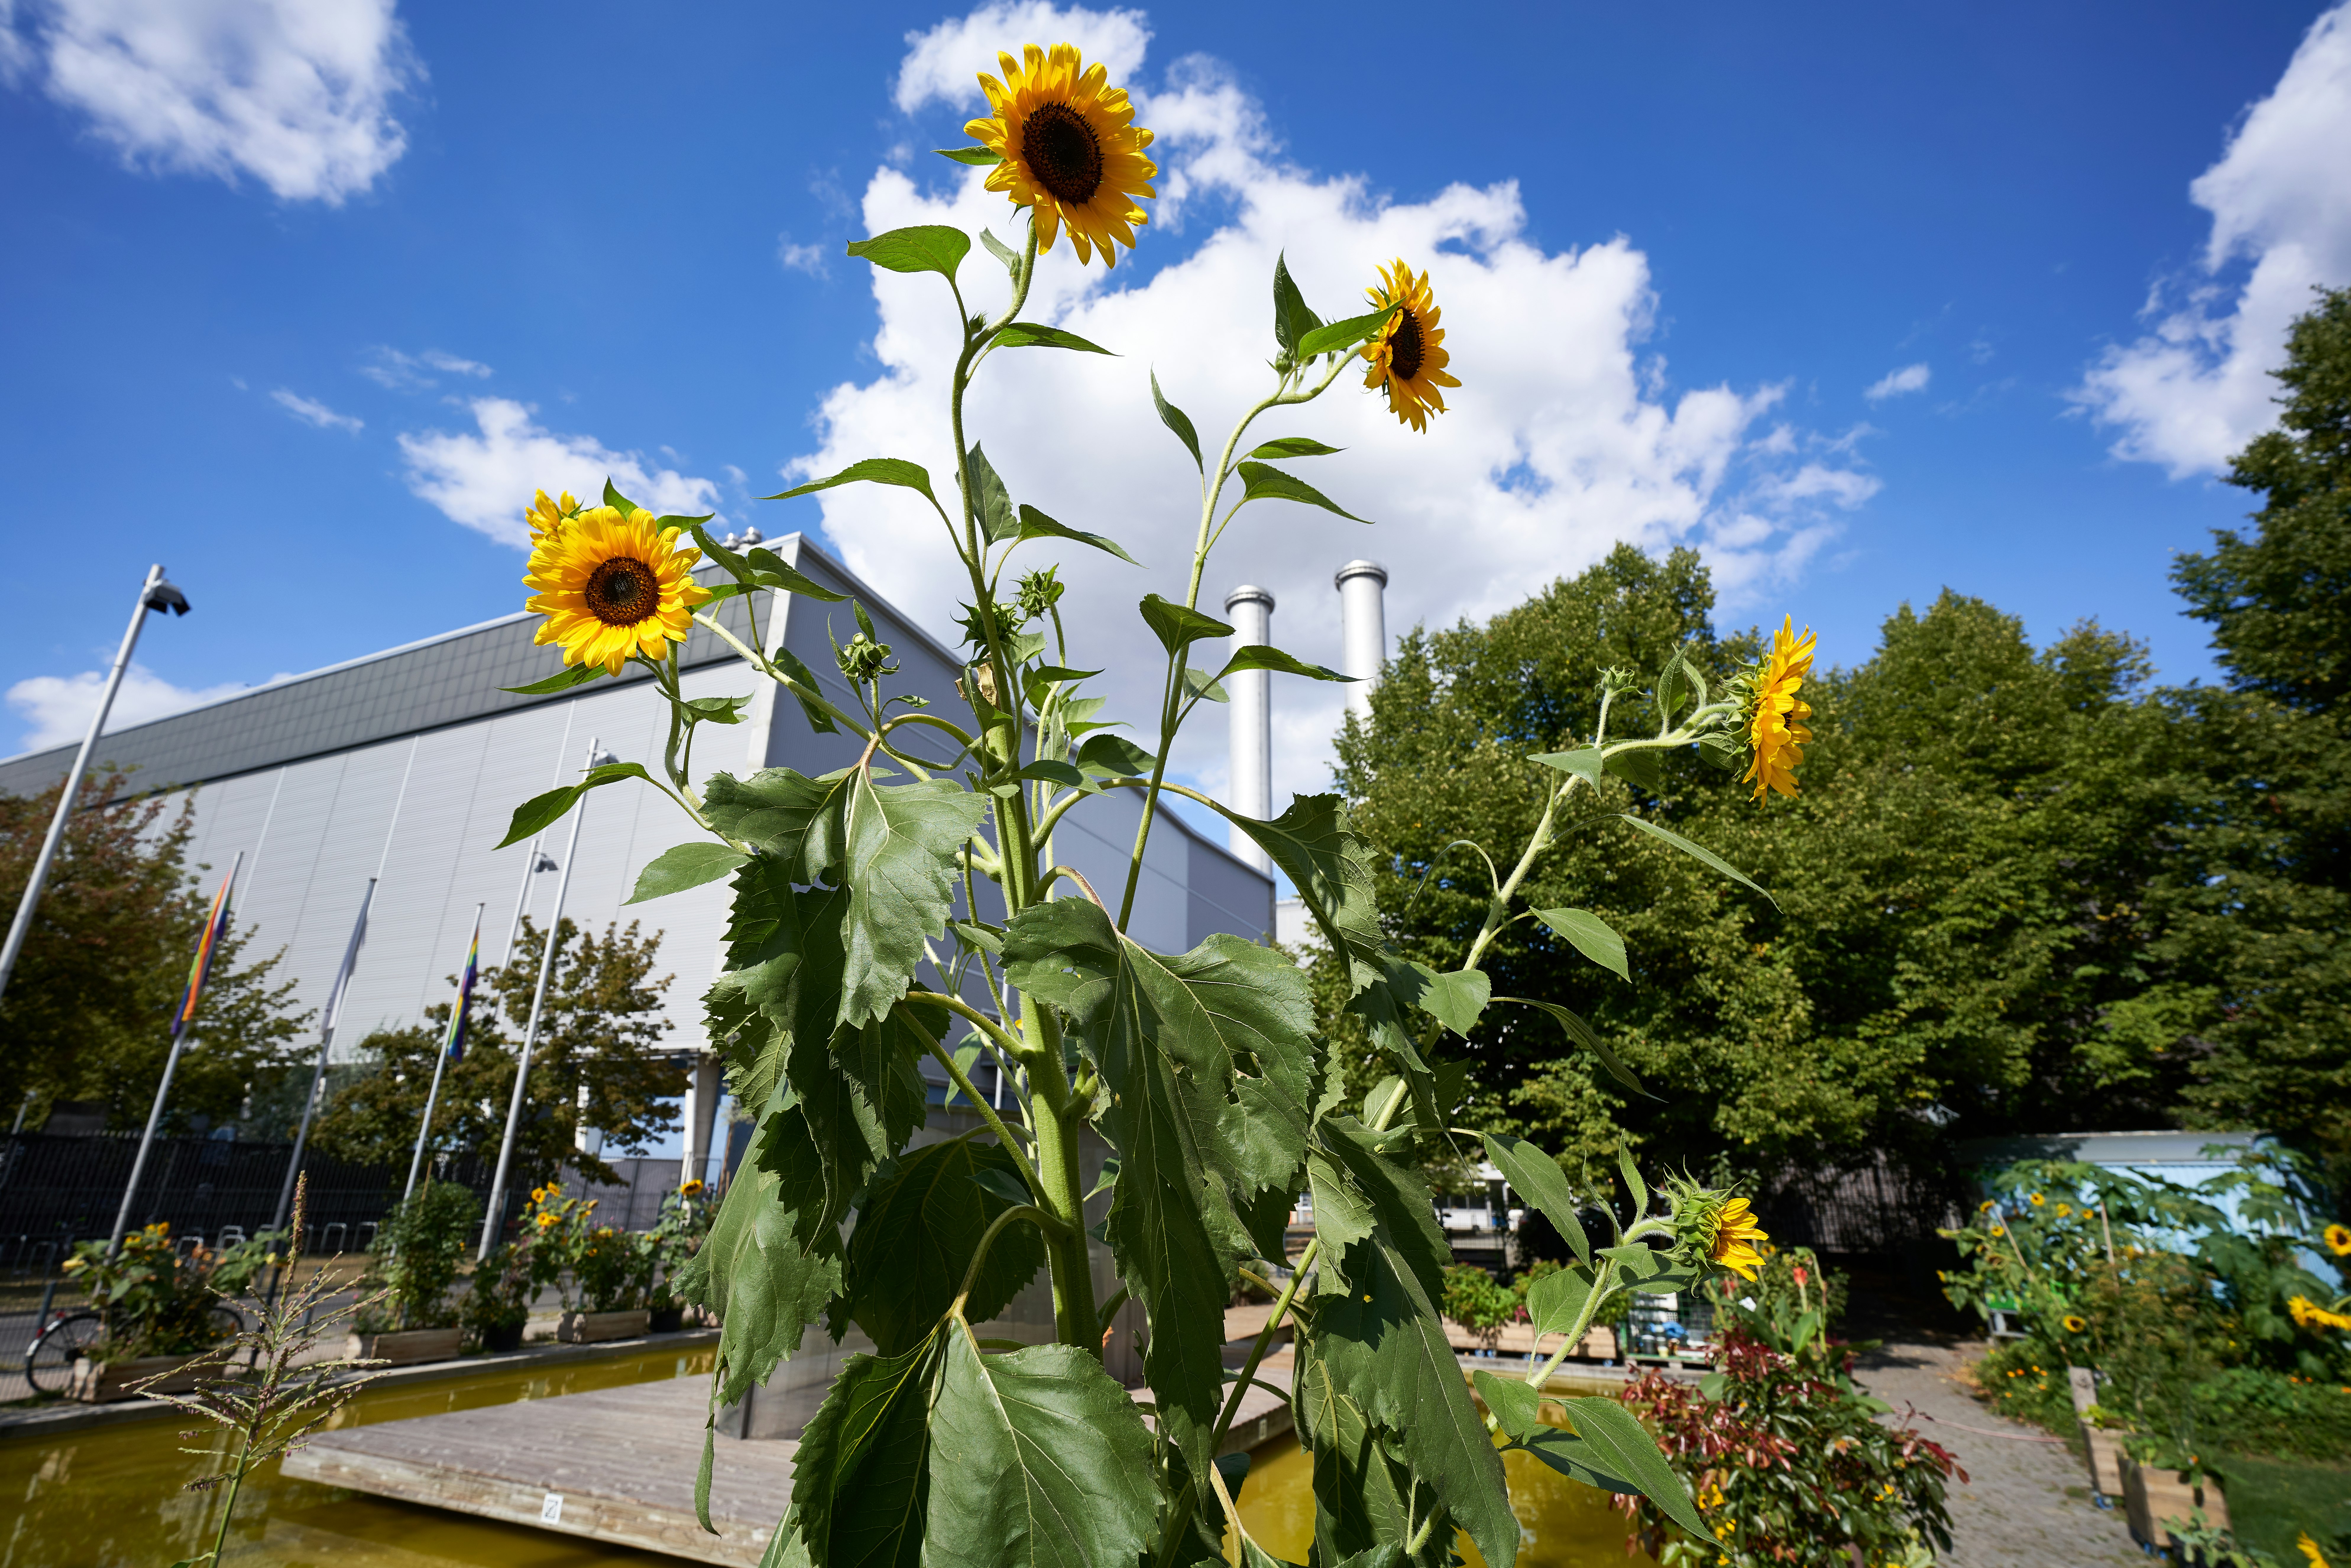 An alternative garden with sunflowers in front of a cogeneration plant  in Berlin, Germany